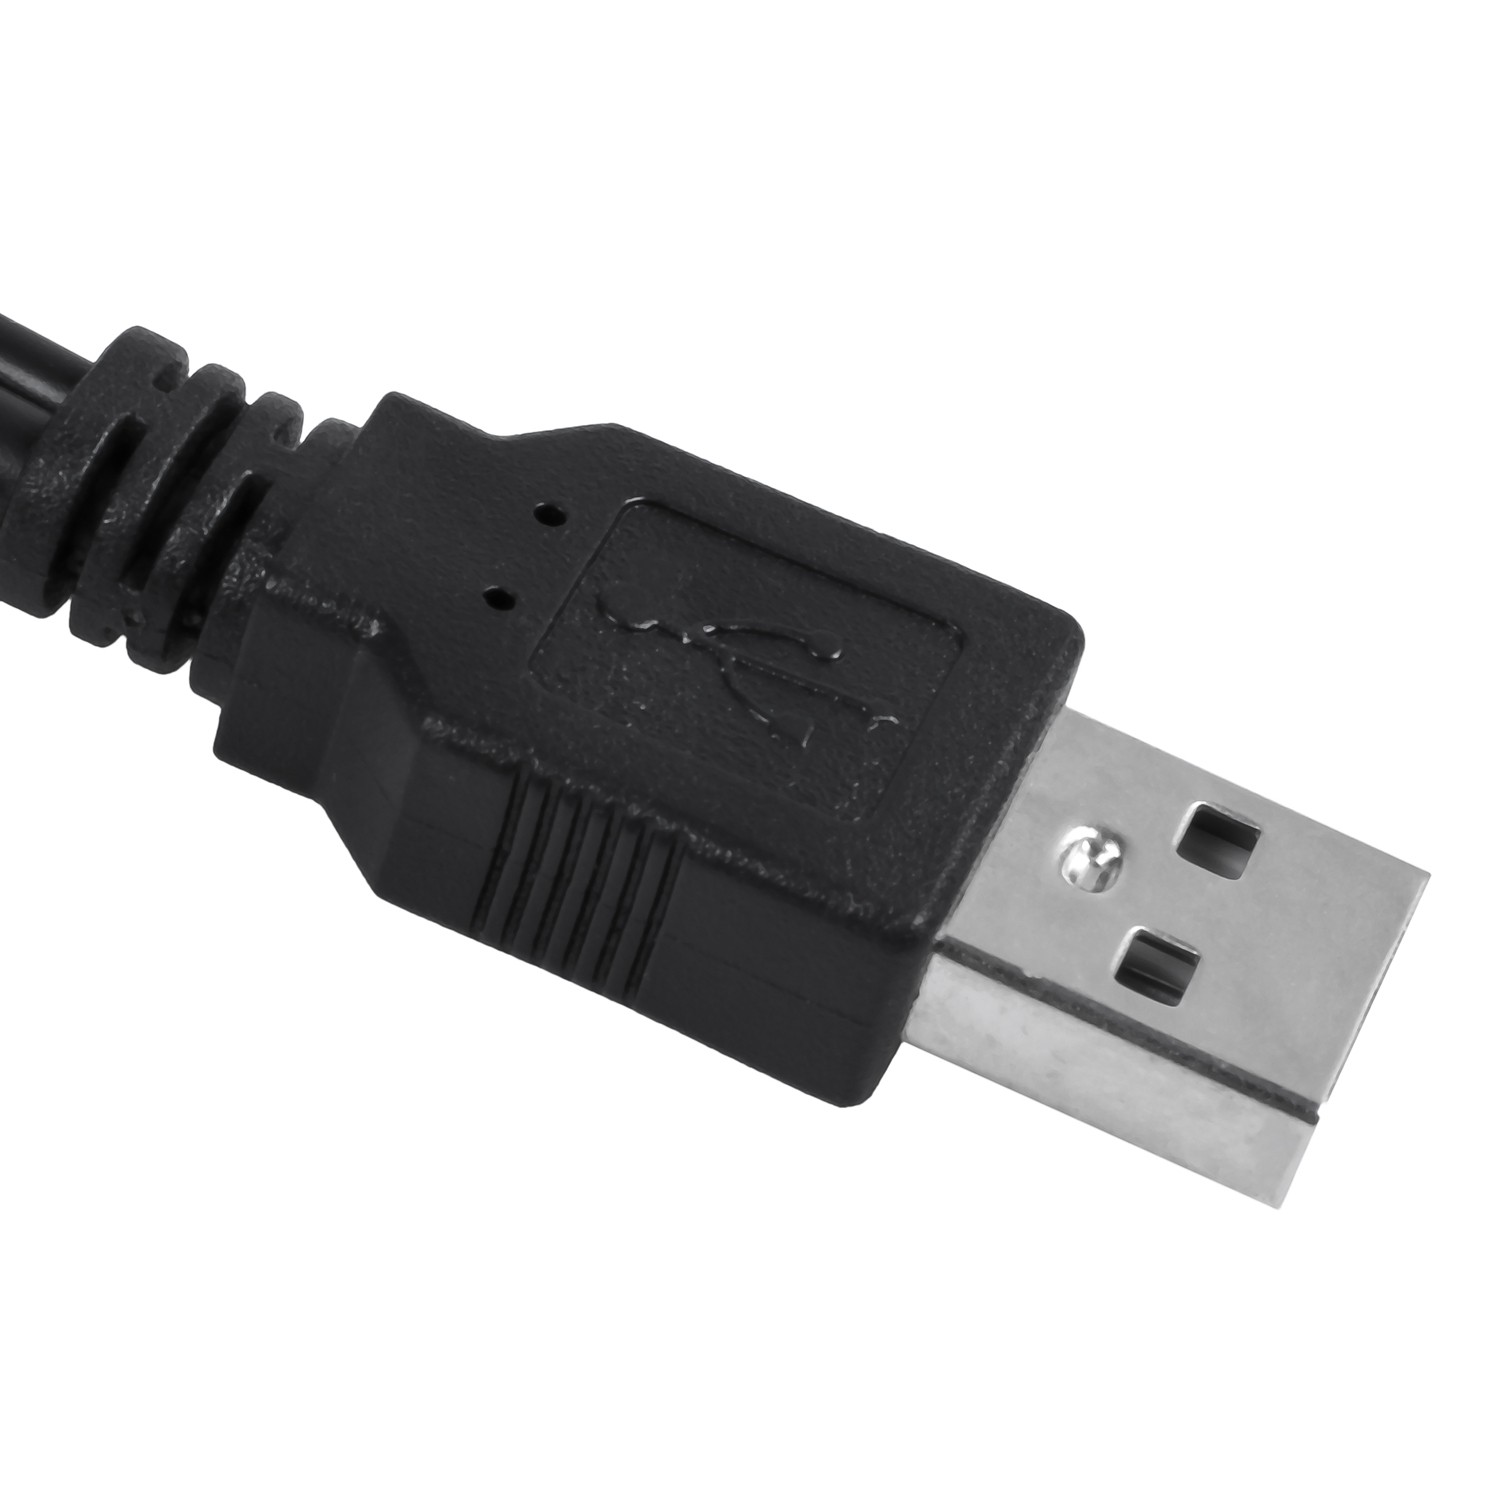 USB 2.0 to IDE SATA S-ATA 2.5/3.5 inch Adapter For HDD/SSD Laptop Hard Disk Drive Converter Cable